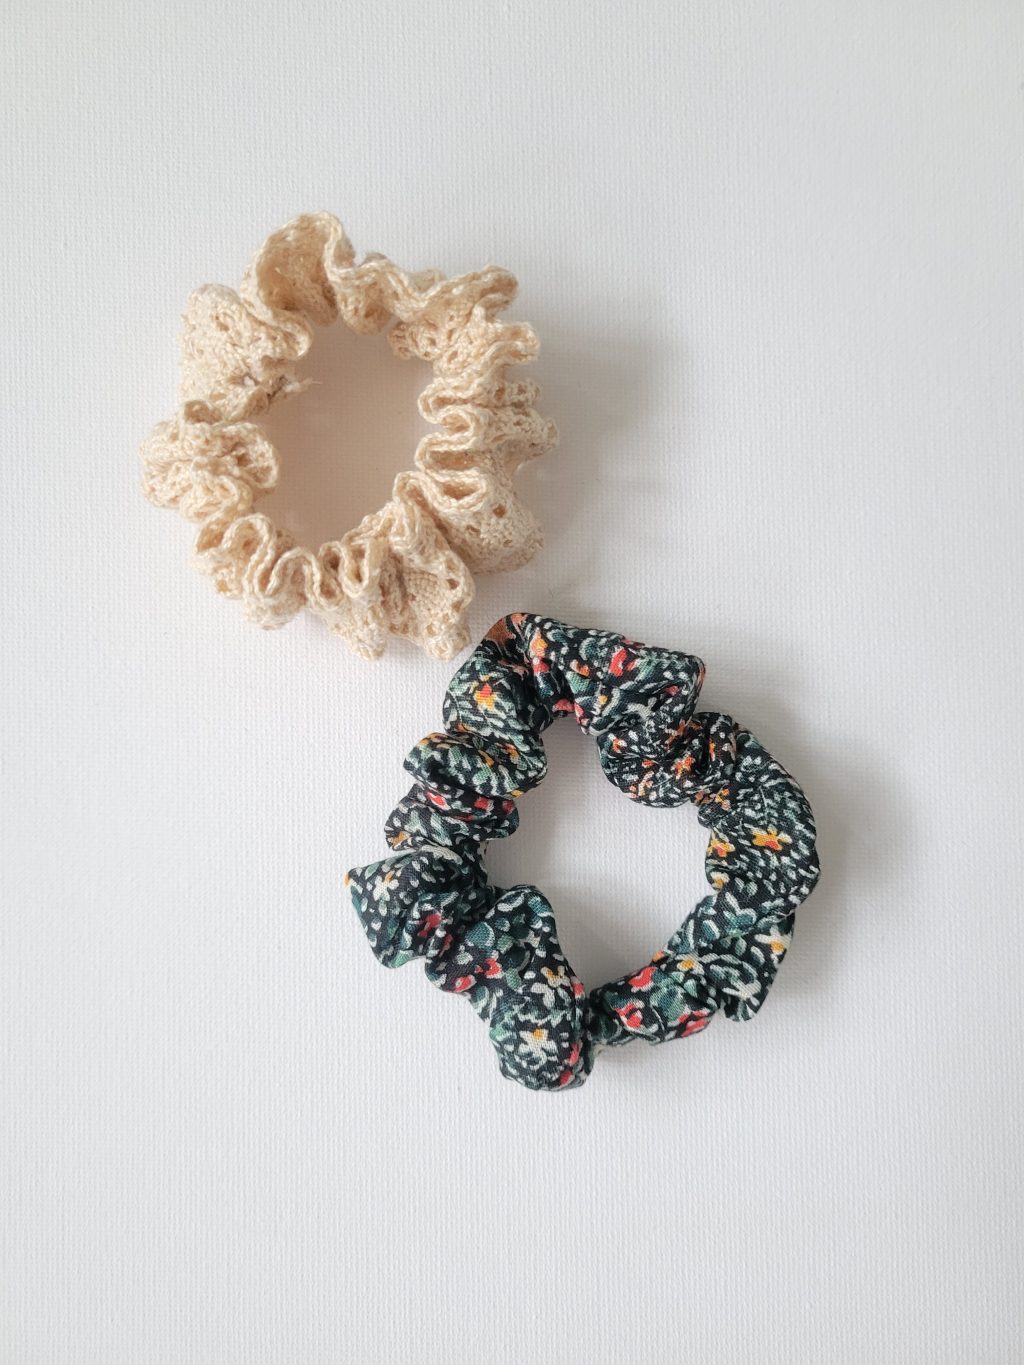 Sewing DIY: How to Make a Super Simple Hair Scrunchie